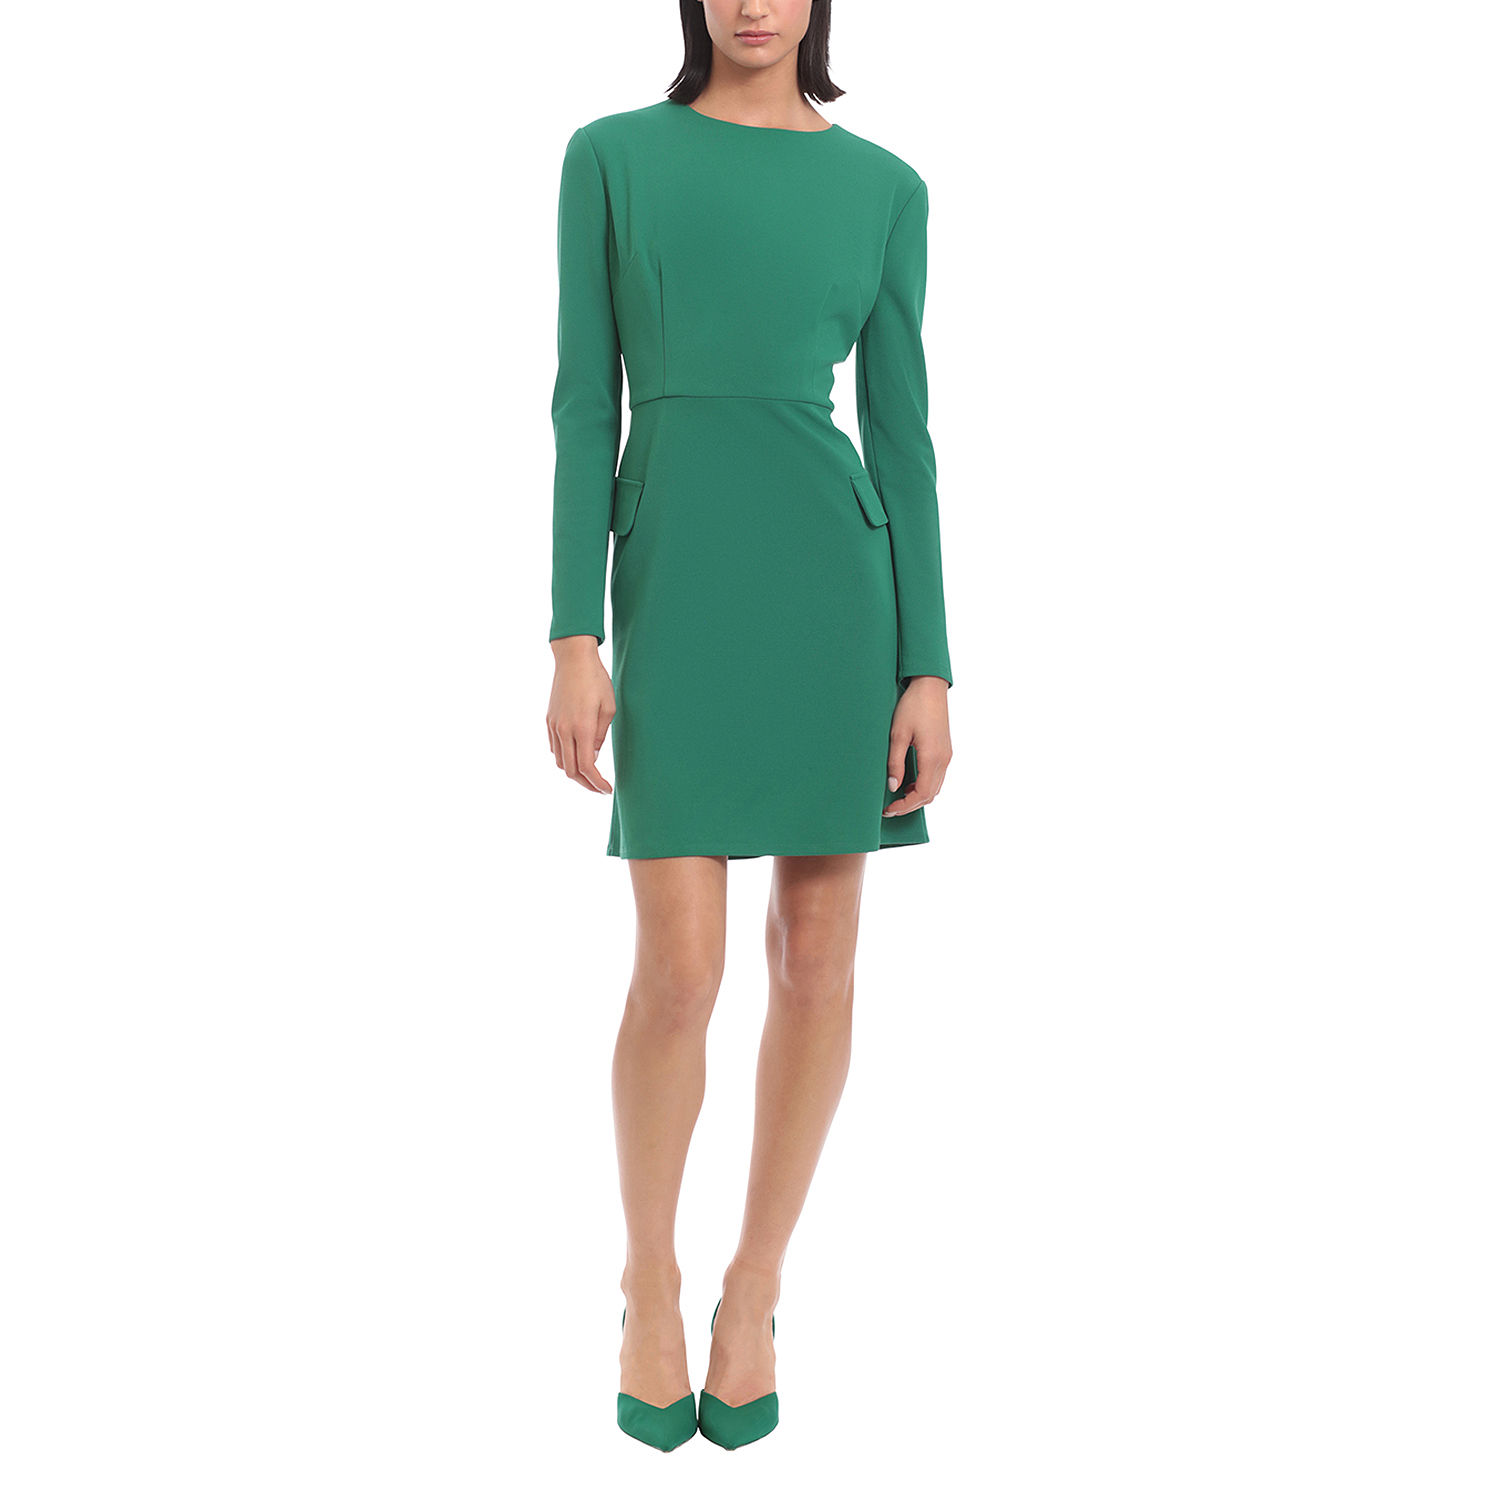 Clover And Sloane Long Sleeve Sheath Dress - JCPenney